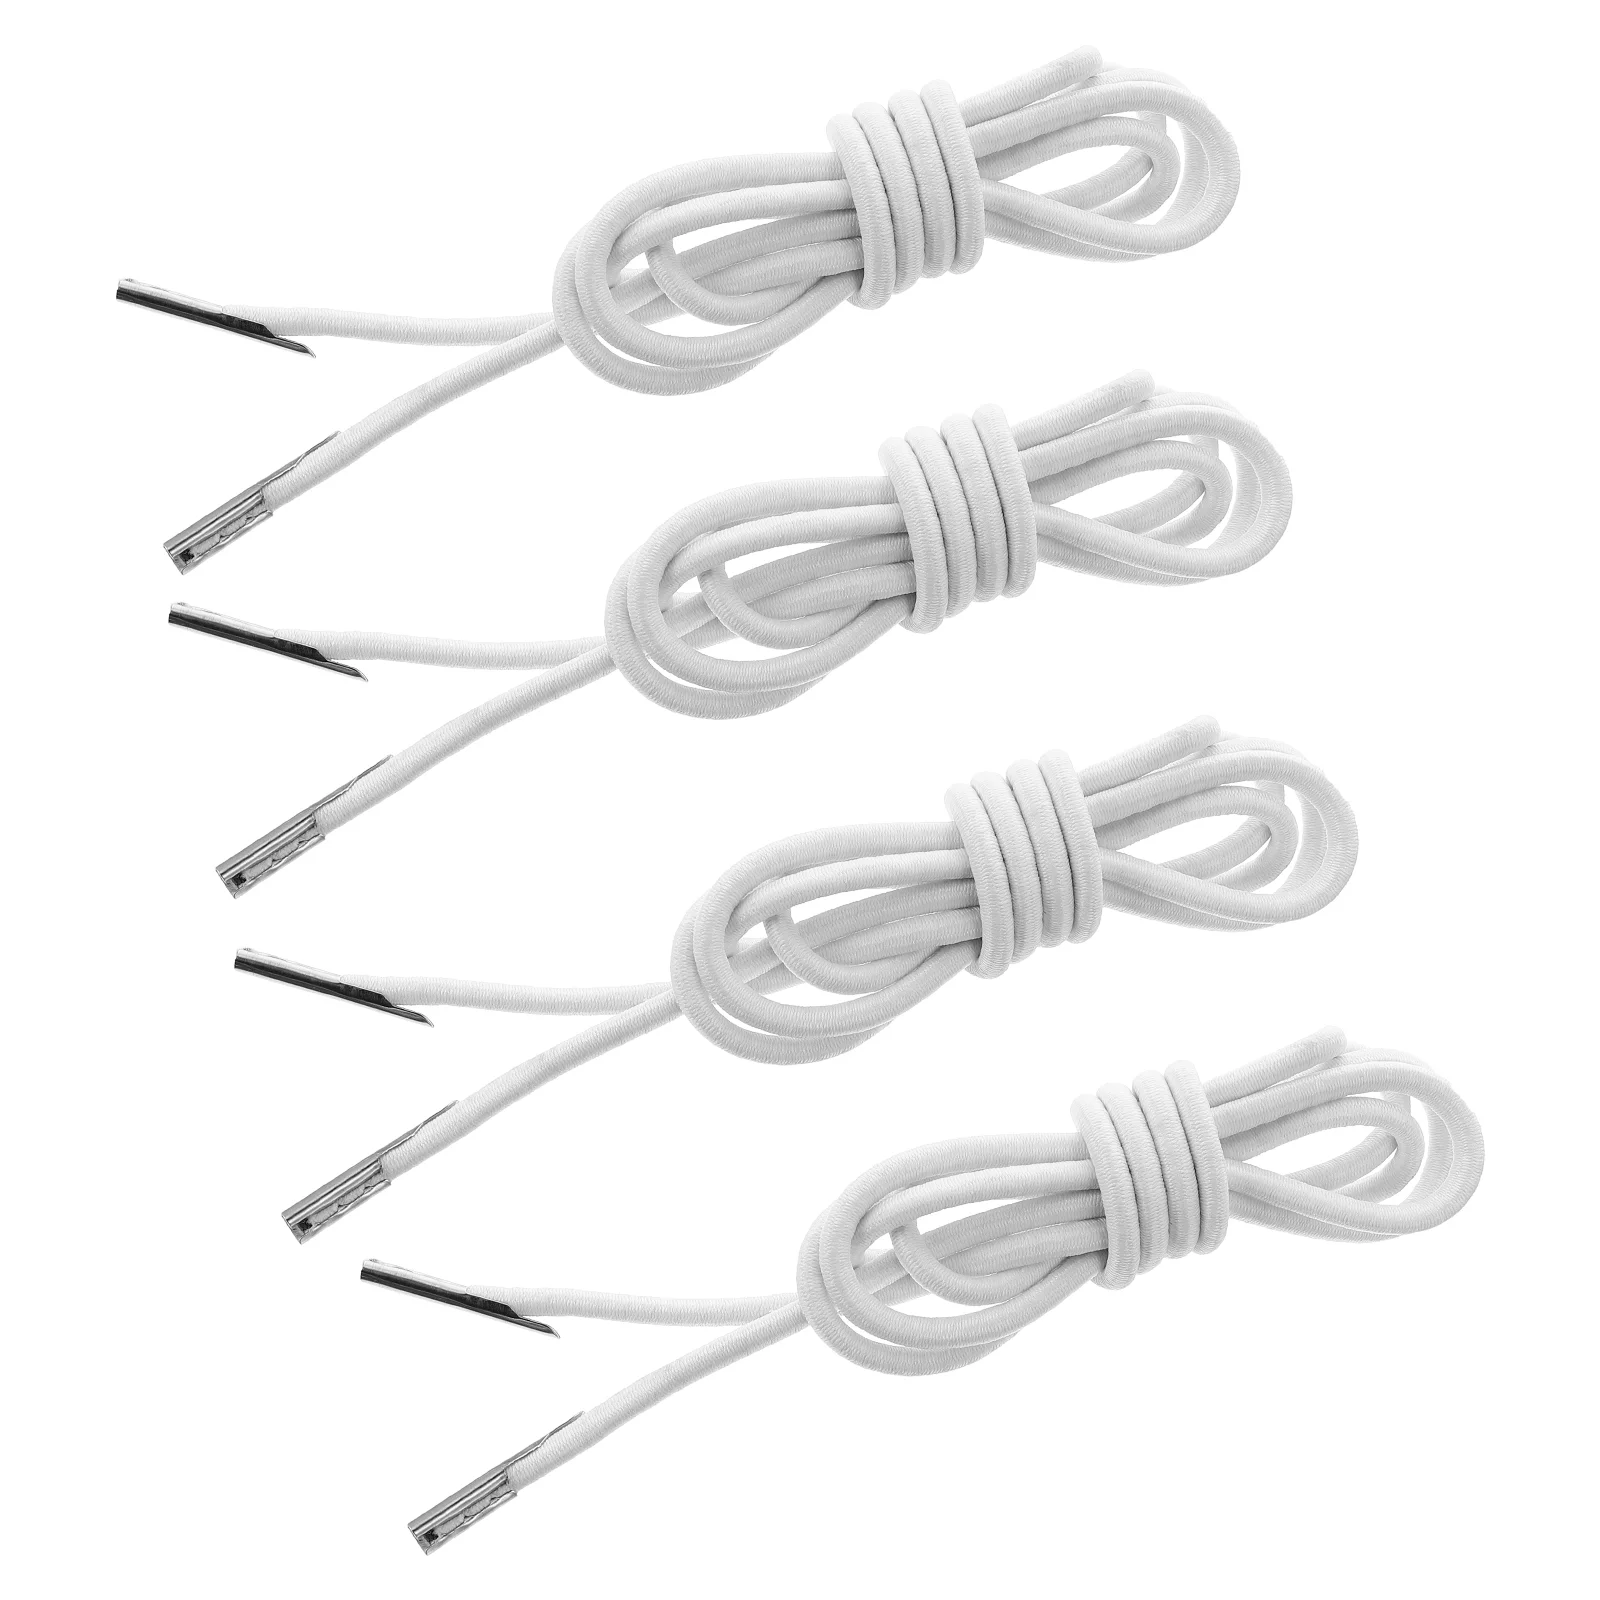 

4 Pcs Deck Lounge Chairs Chaise Longue Replacement Cords Bungee Rope Recliners Elastic Ropes White Inner Core Sun loungers